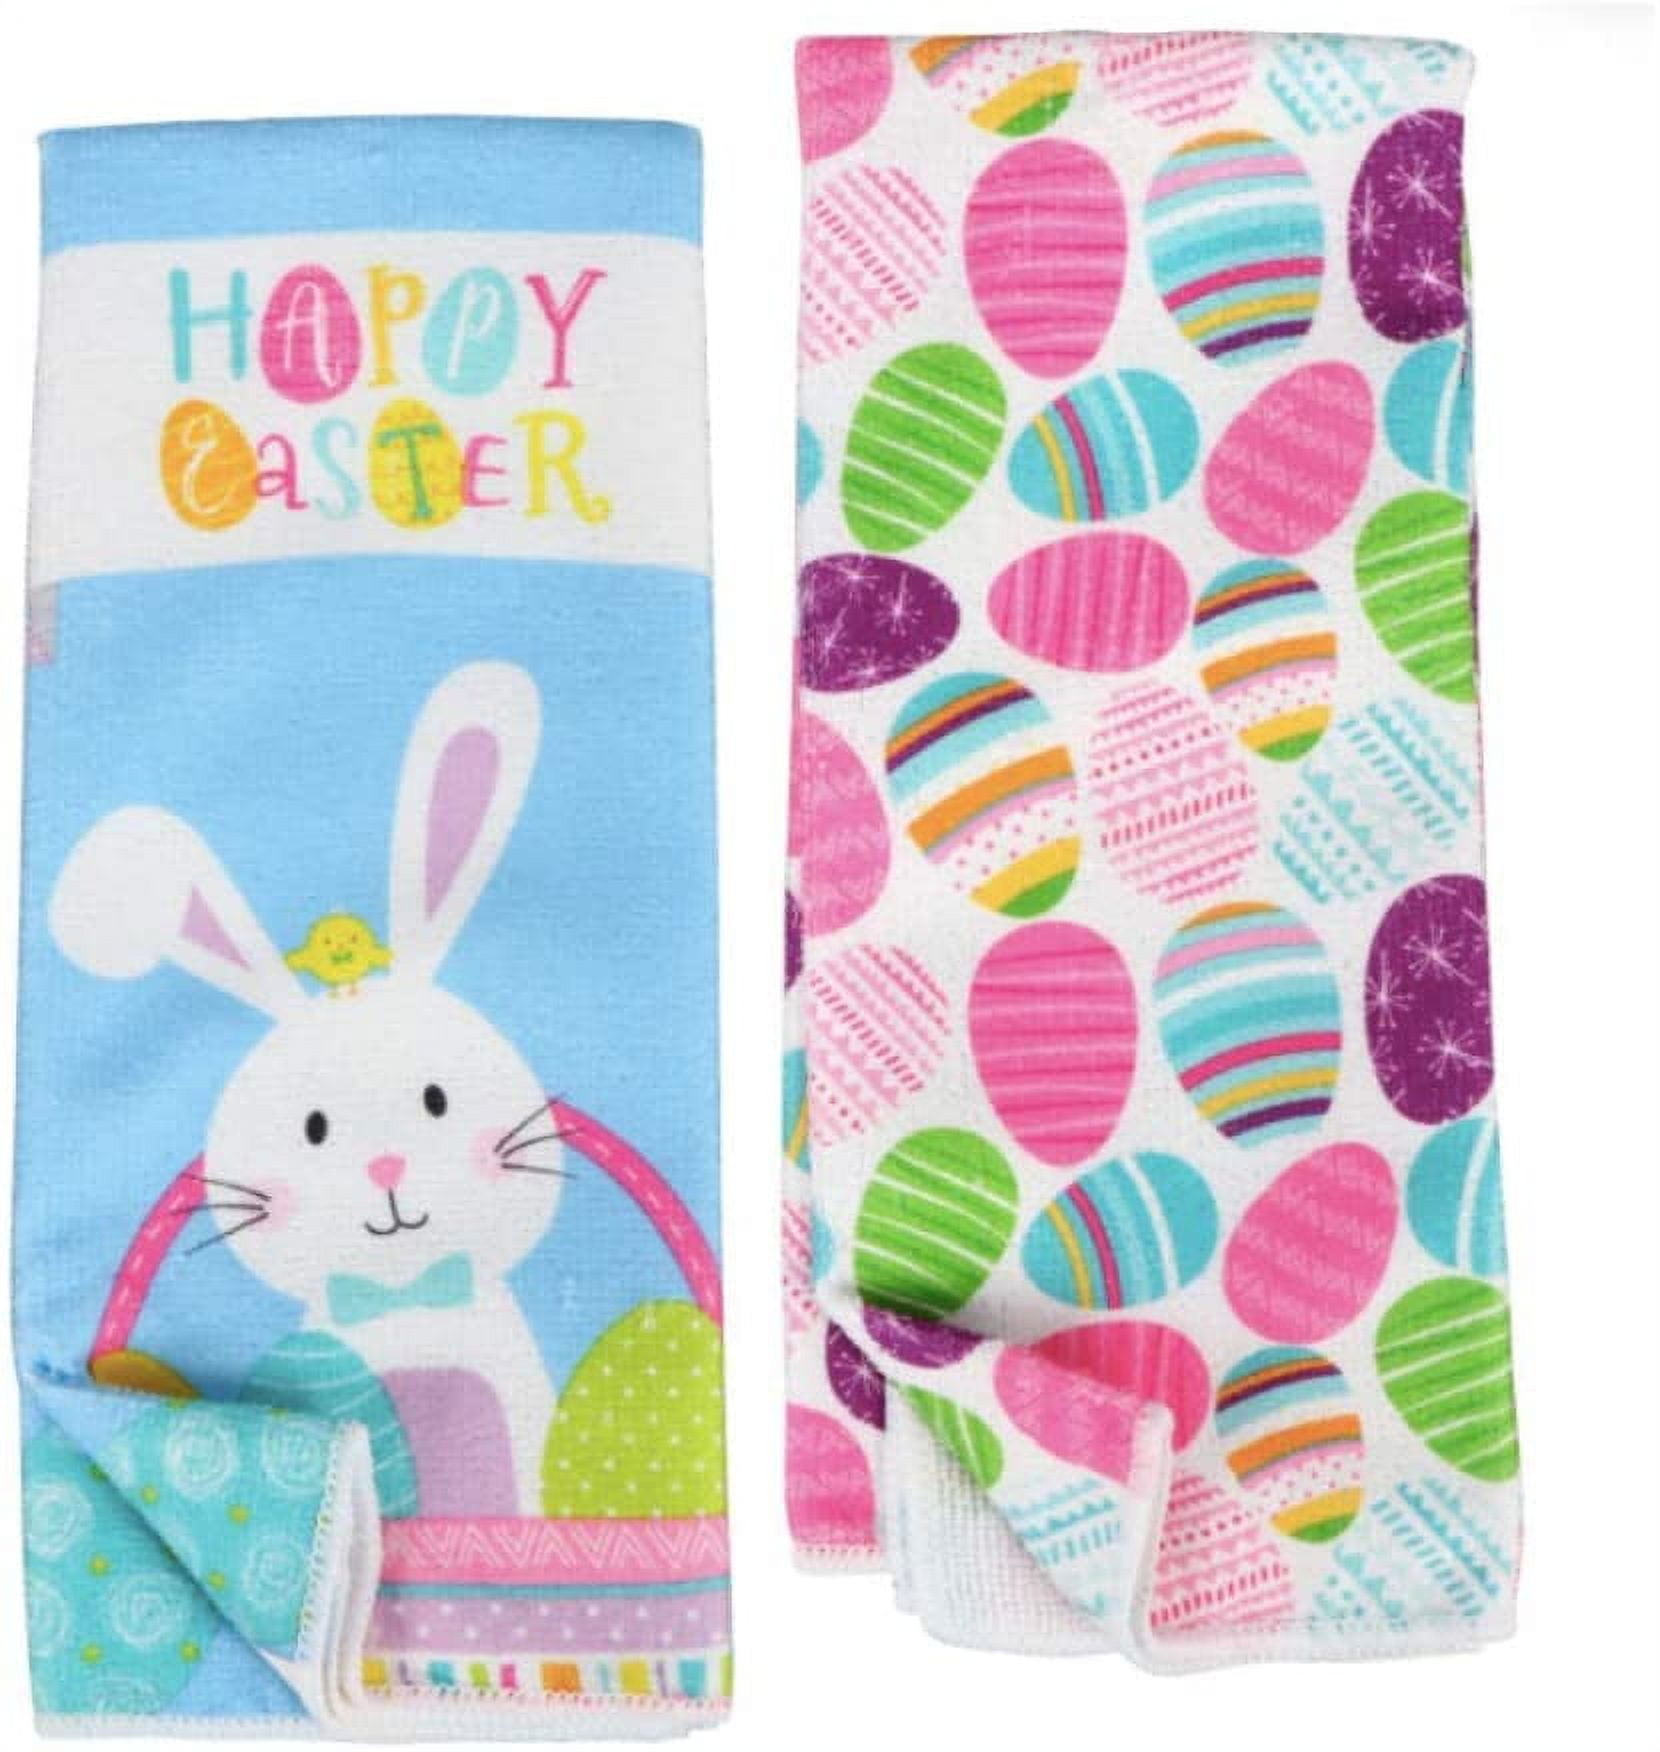  Fun Easter Rabbit Bath Towels Set of 3, Watercolor Gray Bunny  Hand Towel Cotton Soft Guest Washcloth Thin for Bathroom Decorations  Housewarming Kitchen Swim Pool Spa Gym Yoga and Hotel Travel